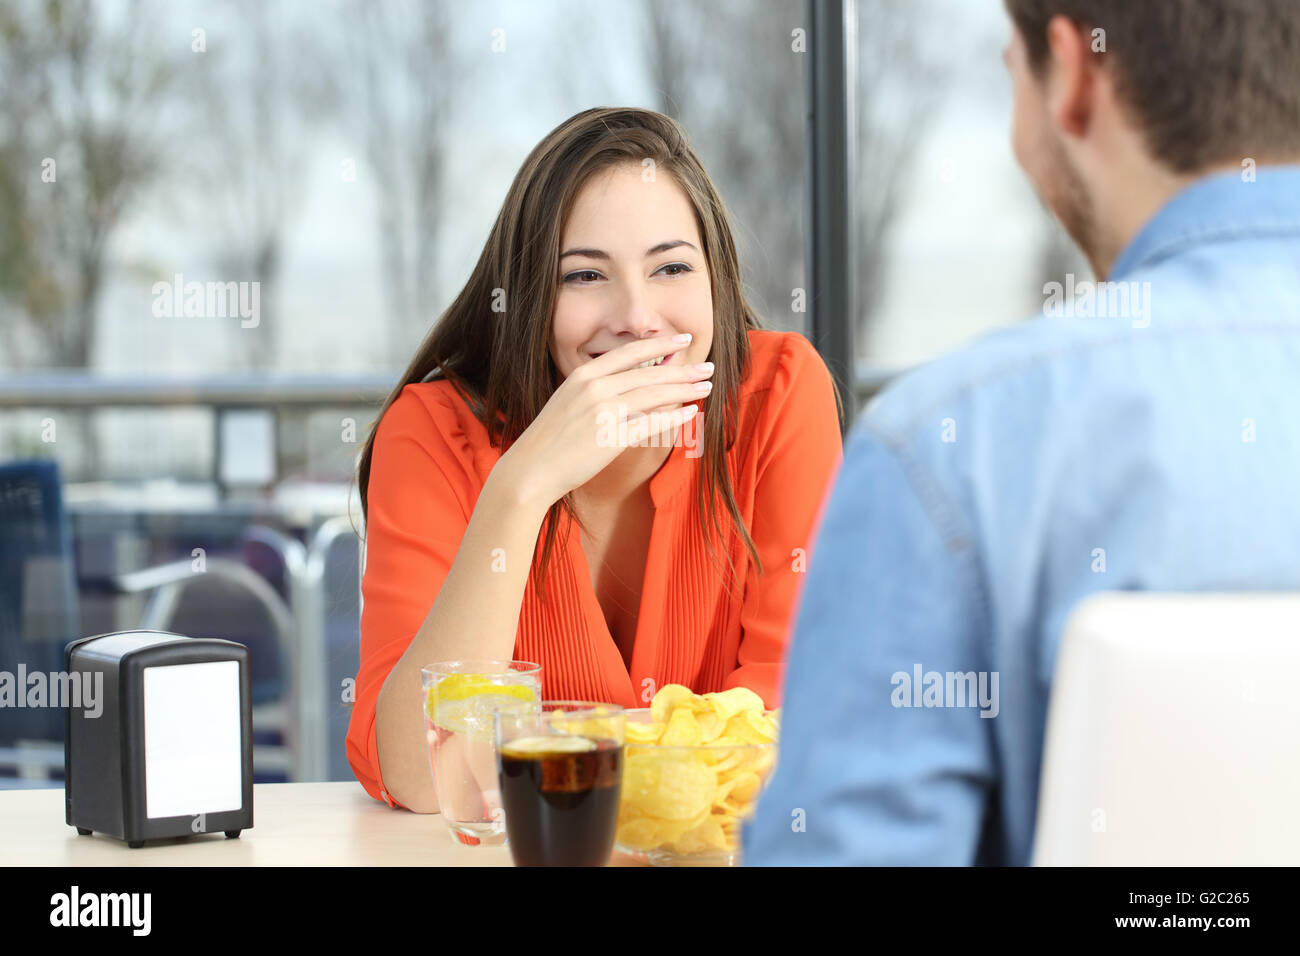 Woman covering her mouth to hide smile or bad breath during a date in a coffee shop with a window in the background Stock Photo